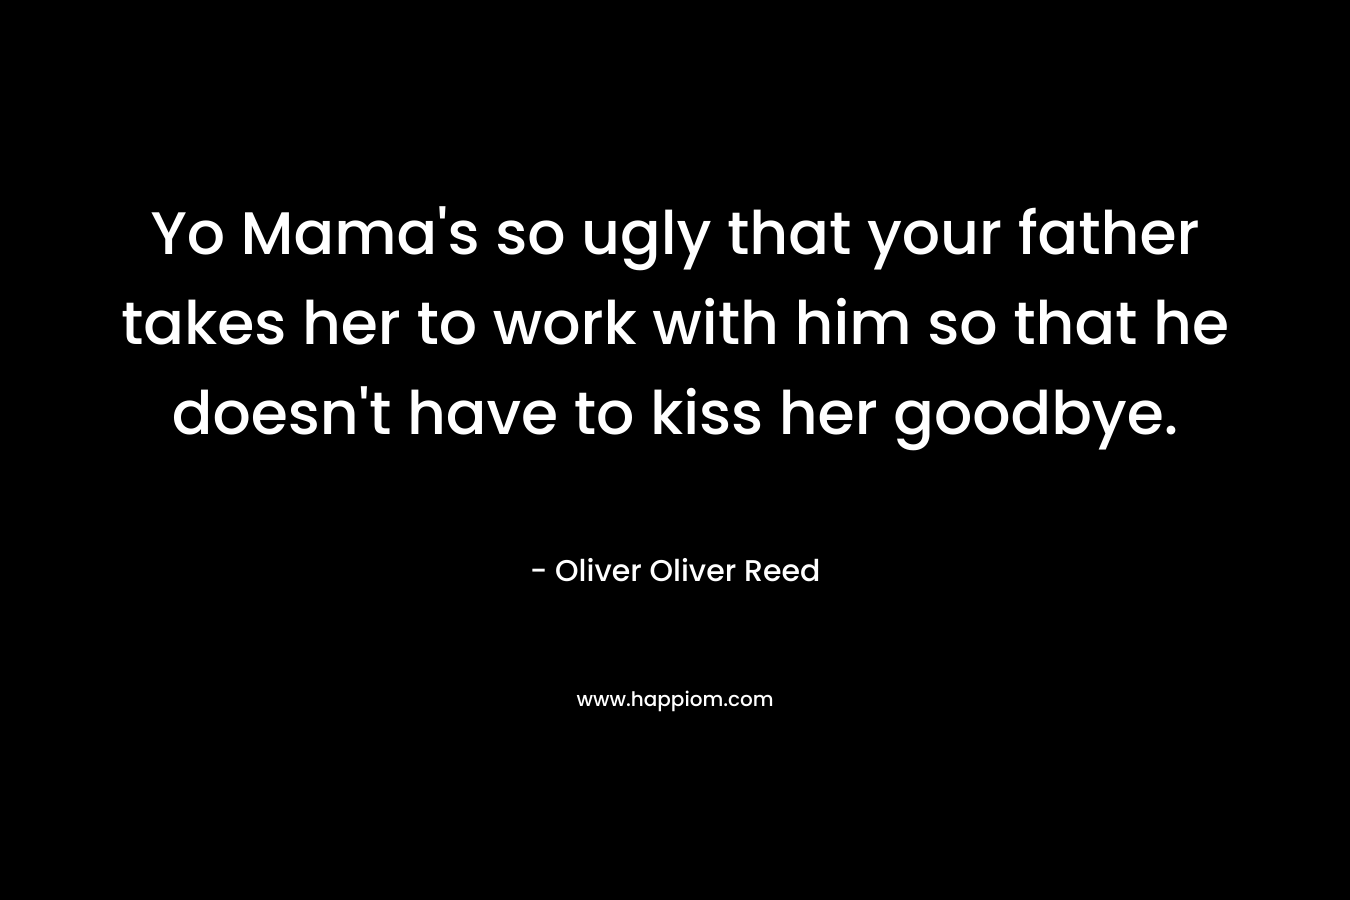 Yo Mama’s so ugly that your father takes her to work with him so that he doesn’t have to kiss her goodbye. – Oliver Oliver Reed